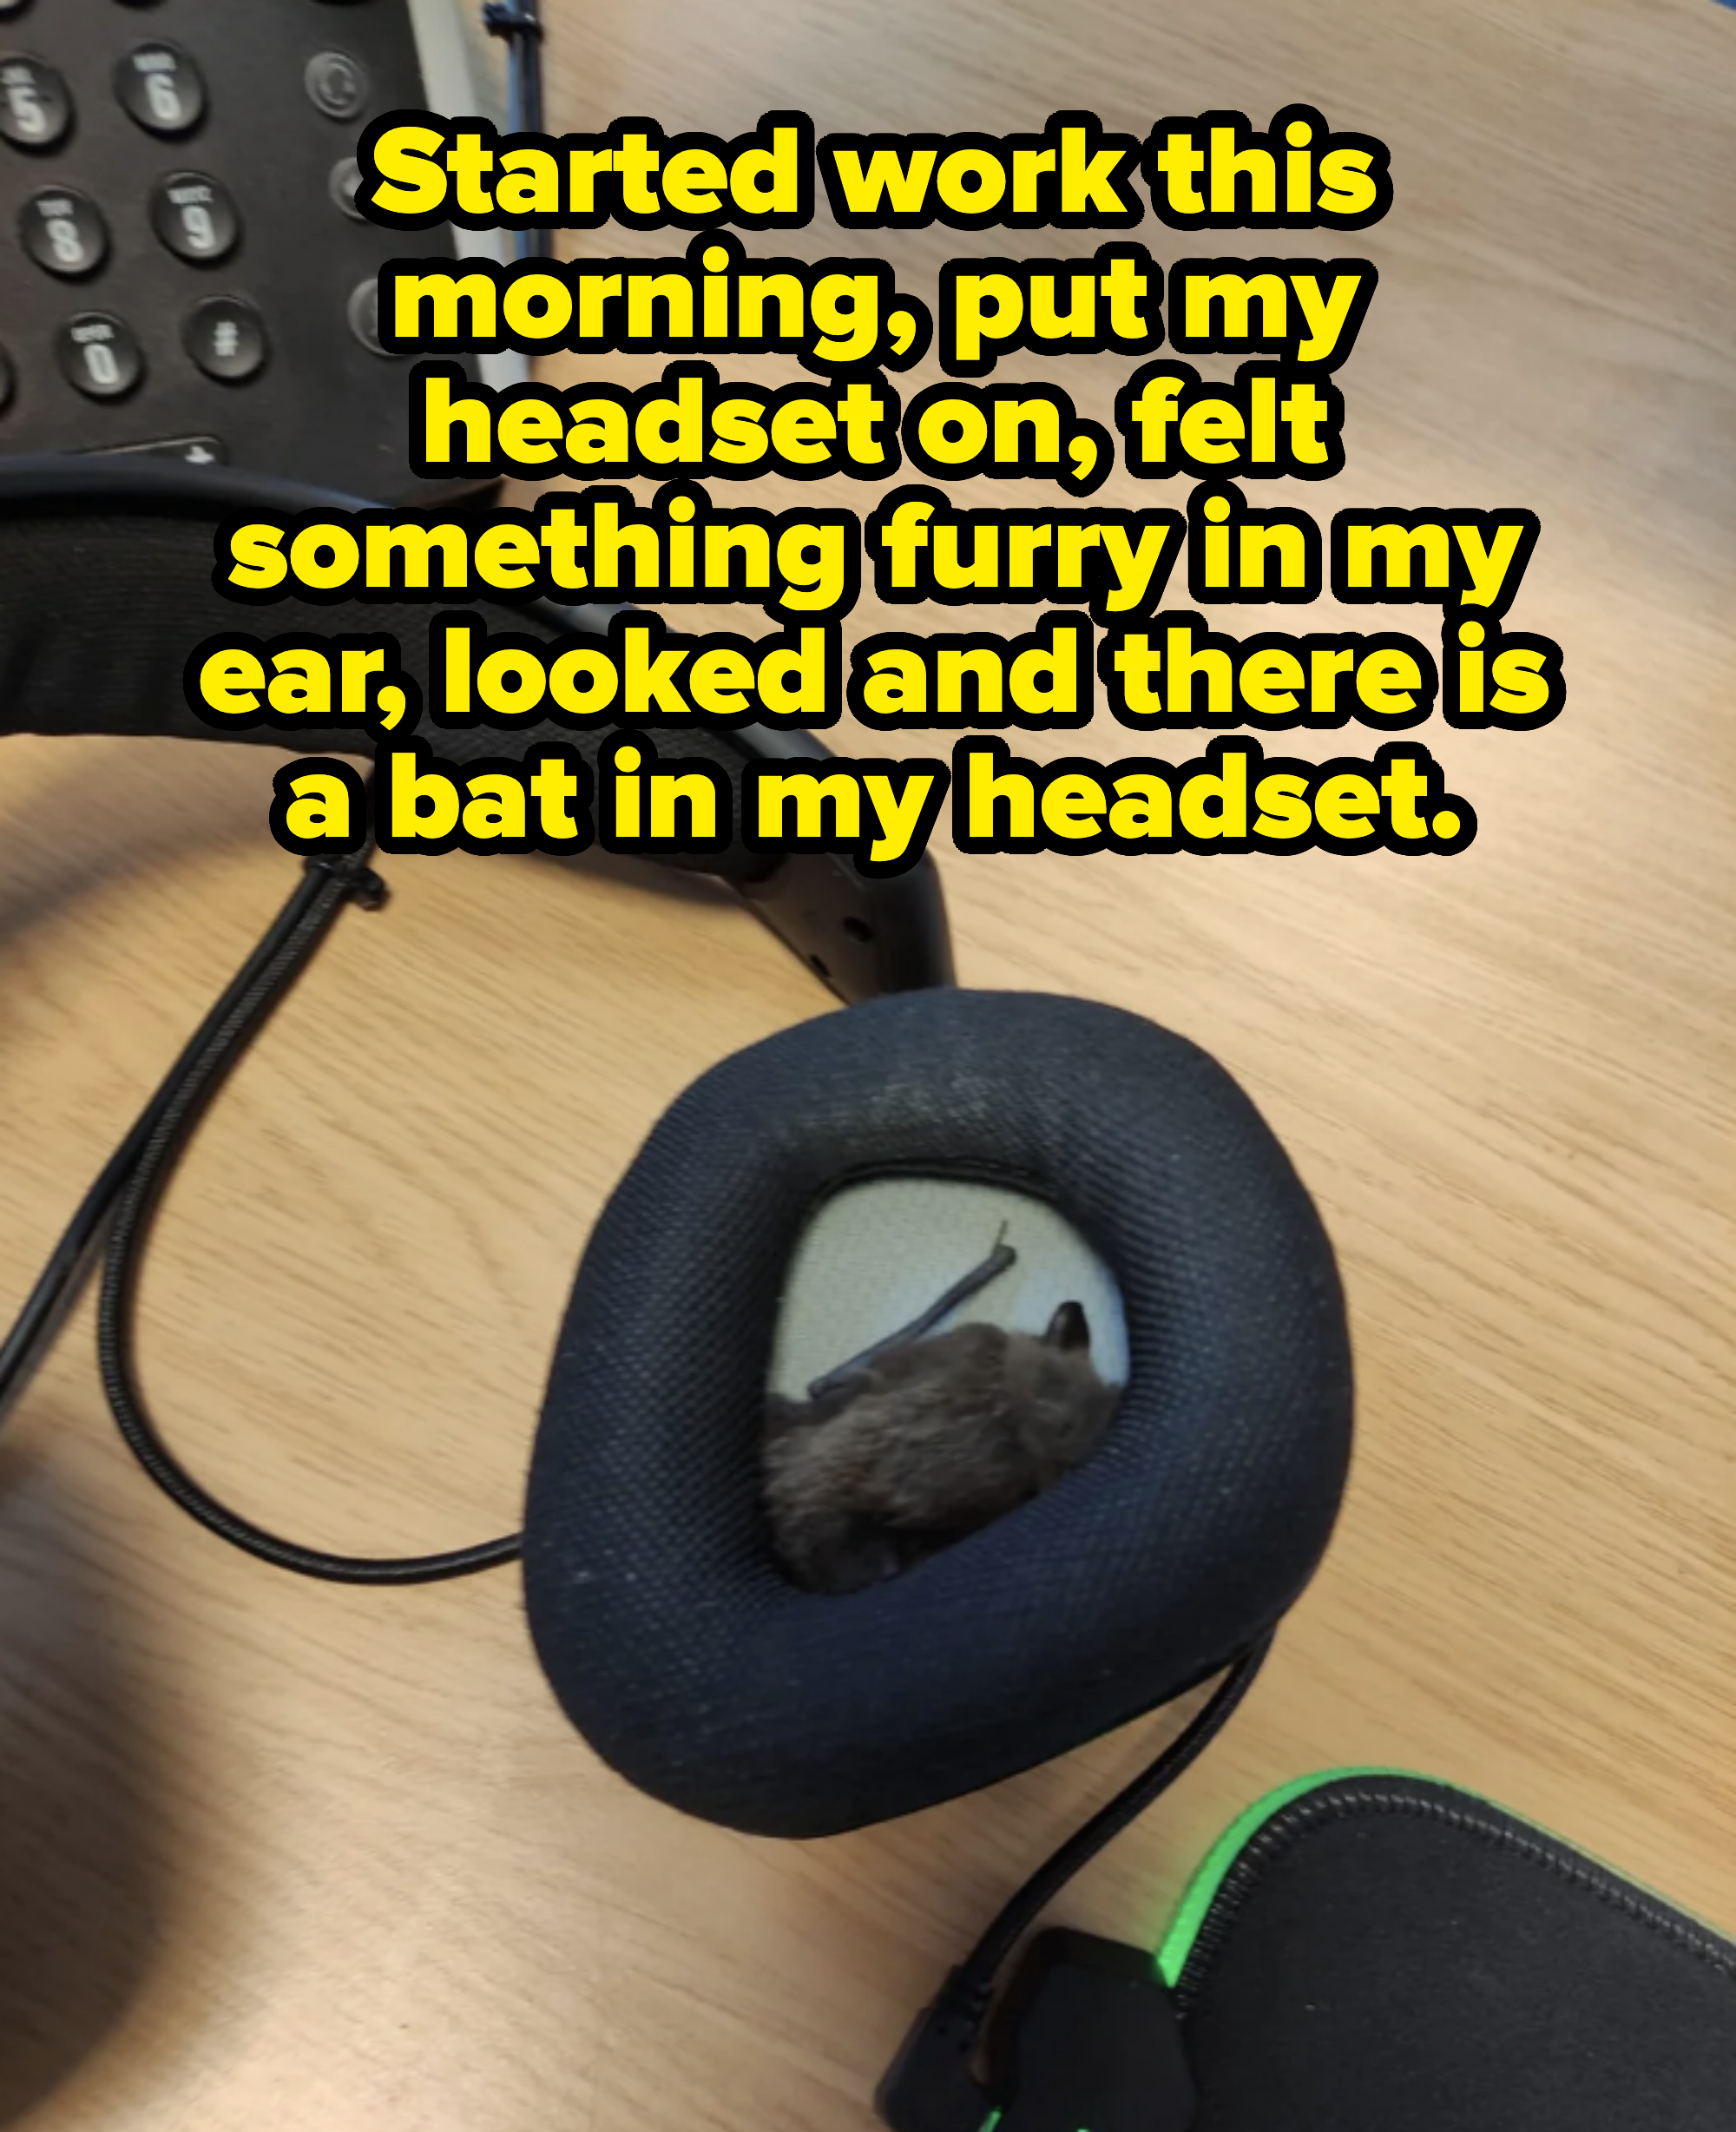 Headset on a desk with a bat peeking out from the ear cushion